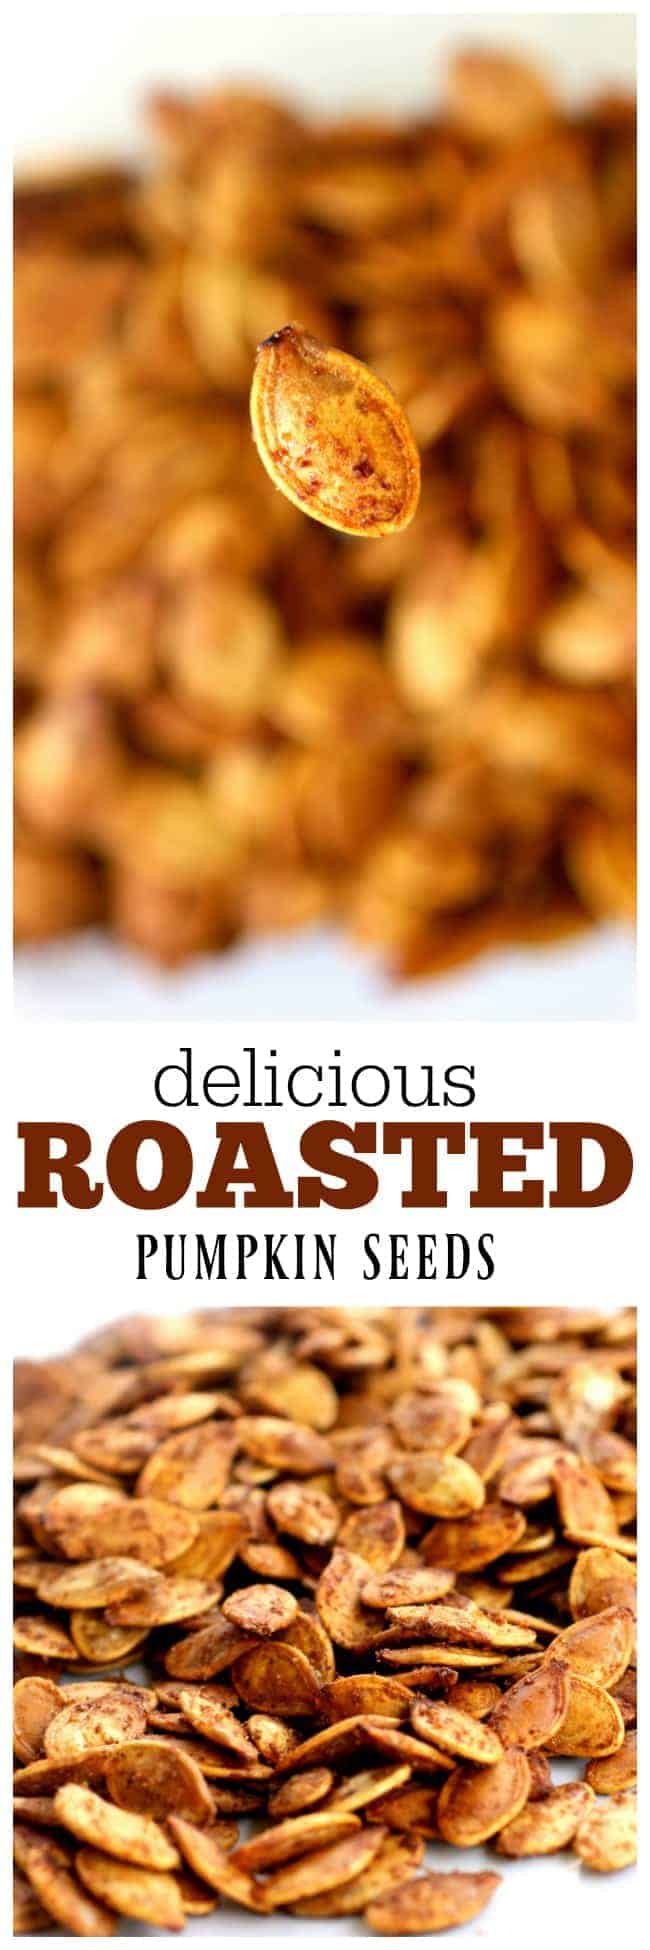 Roasted Pumpkin Seeds are easier than you think. If you've ever wanted to know how to roast pumpkin seeds, I'll teach you. This roasted pumpkin seeds recipe are crispy and full of seasoning! #roasted #pumpkin #seeds #halloween